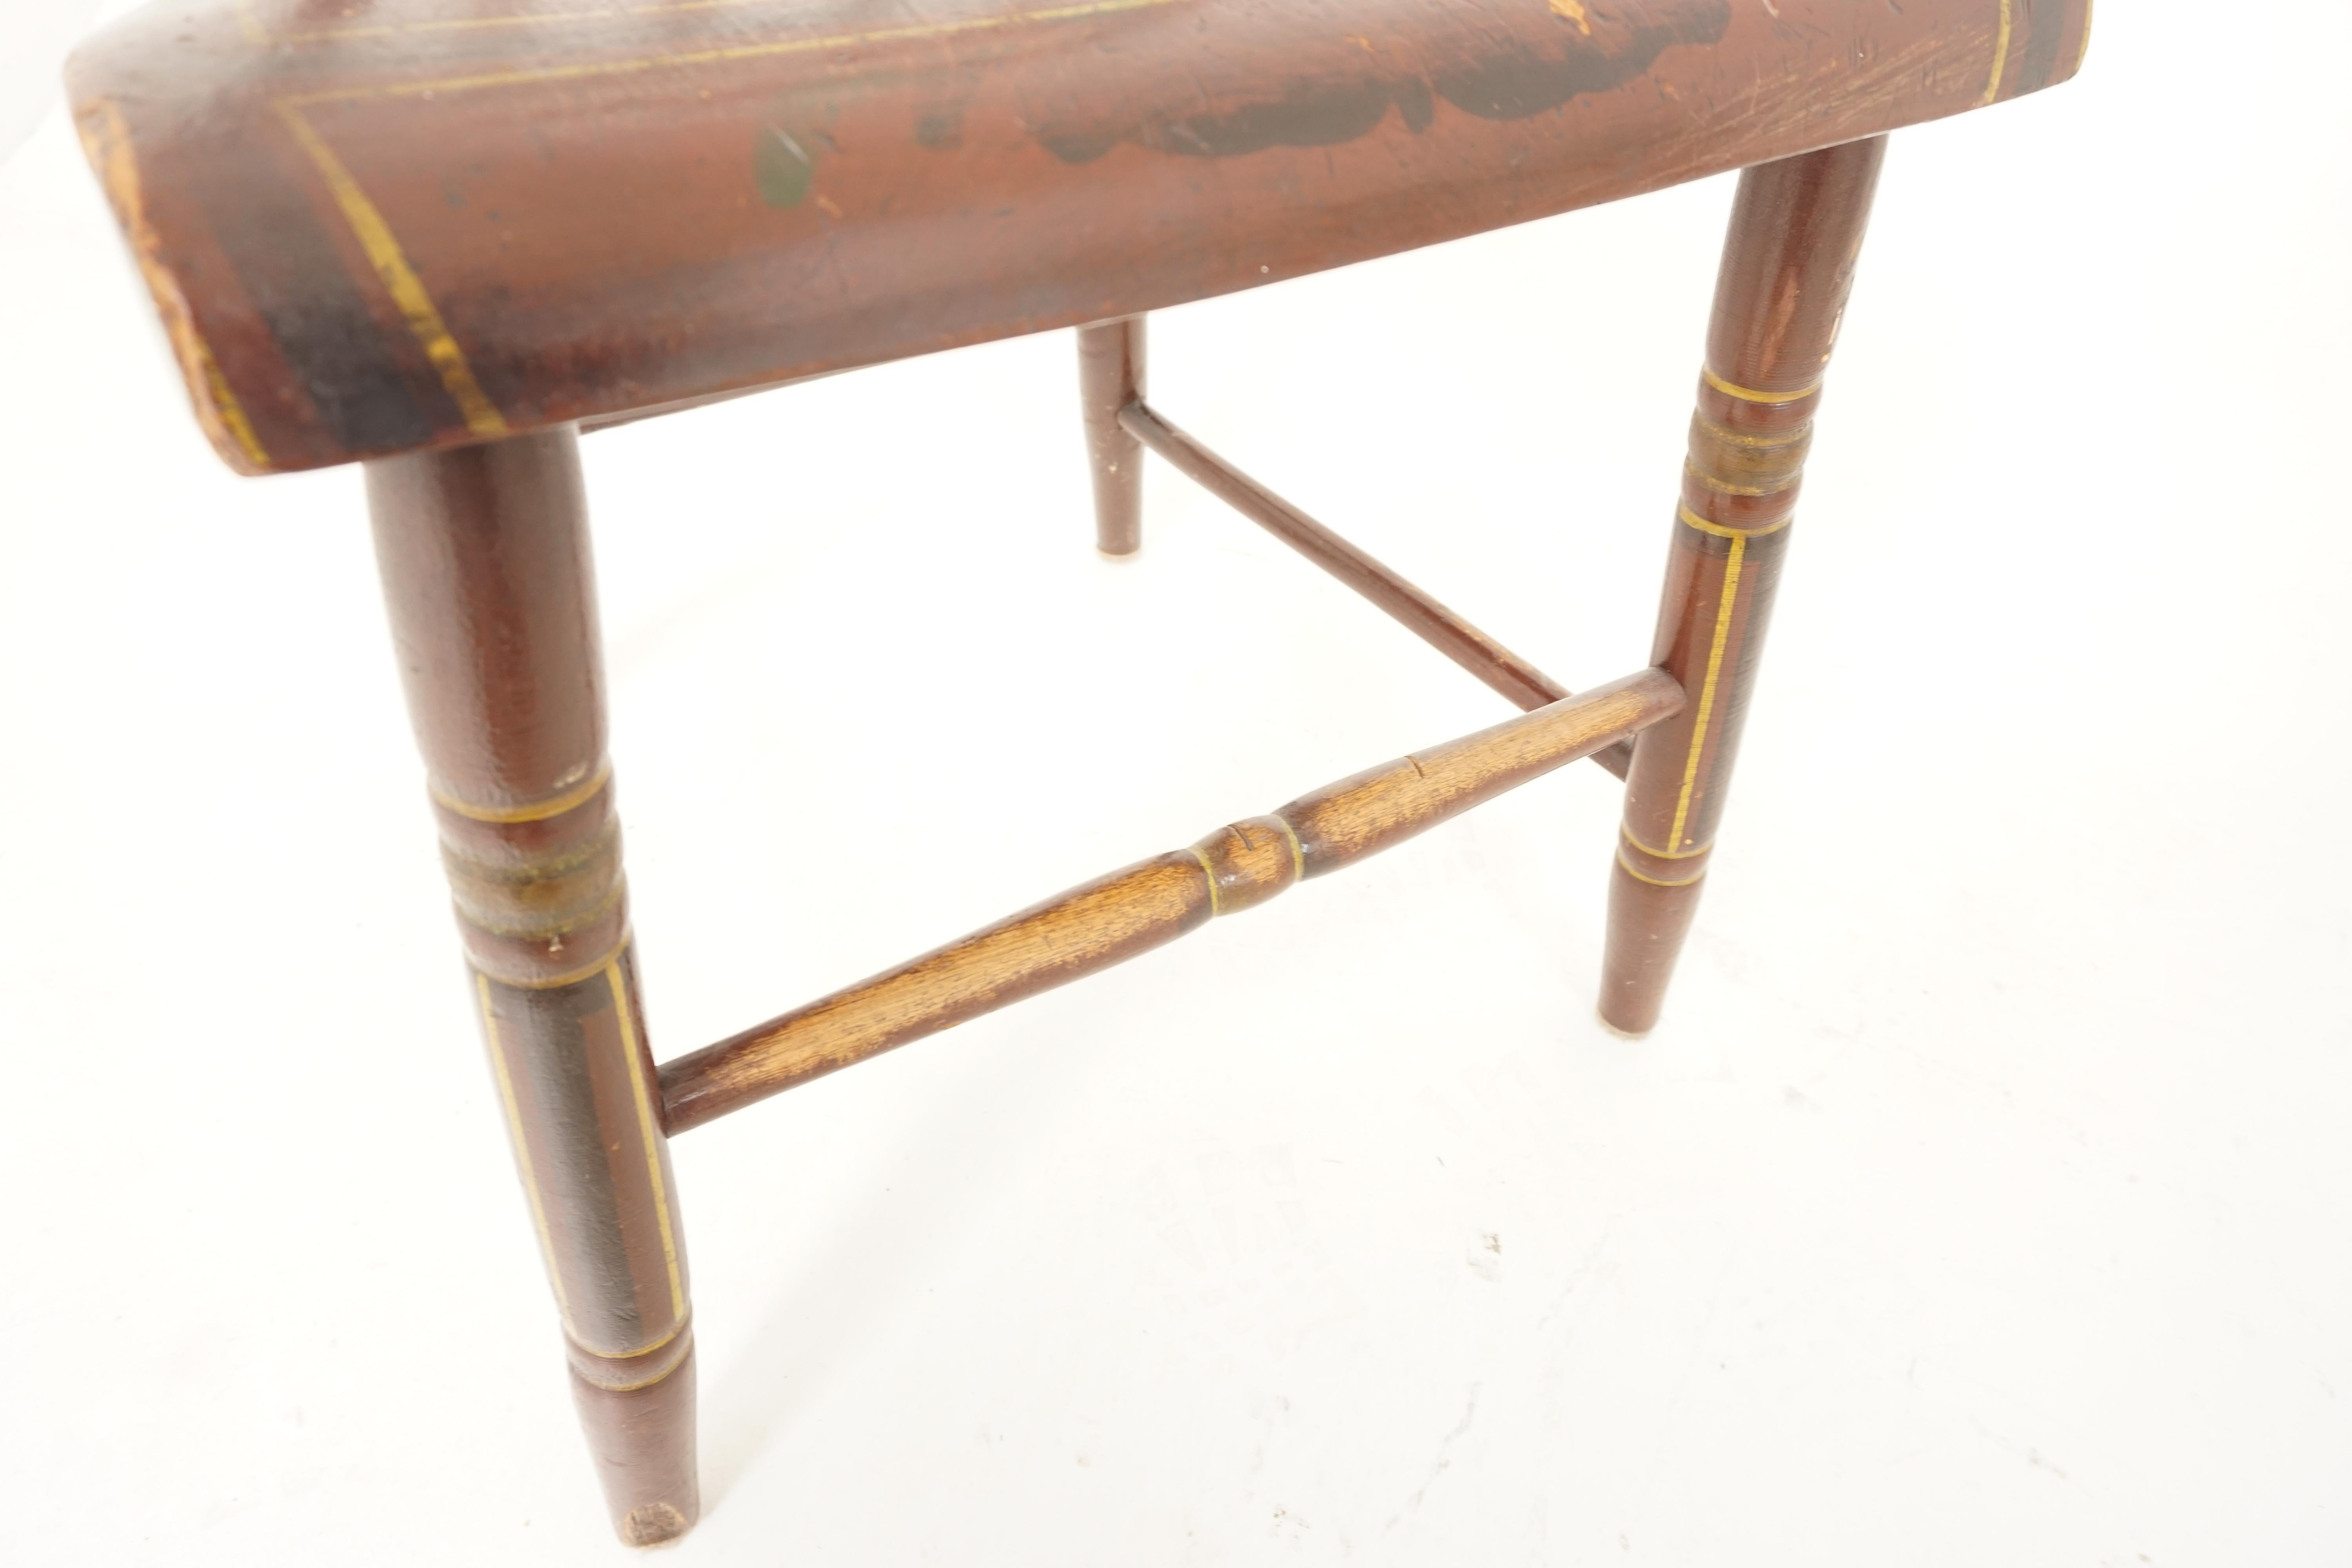 Hand-Crafted Antique Chairs, Set of 6, Pennsylvania Dutch Painted Plank Bottom Chairs, 1890s